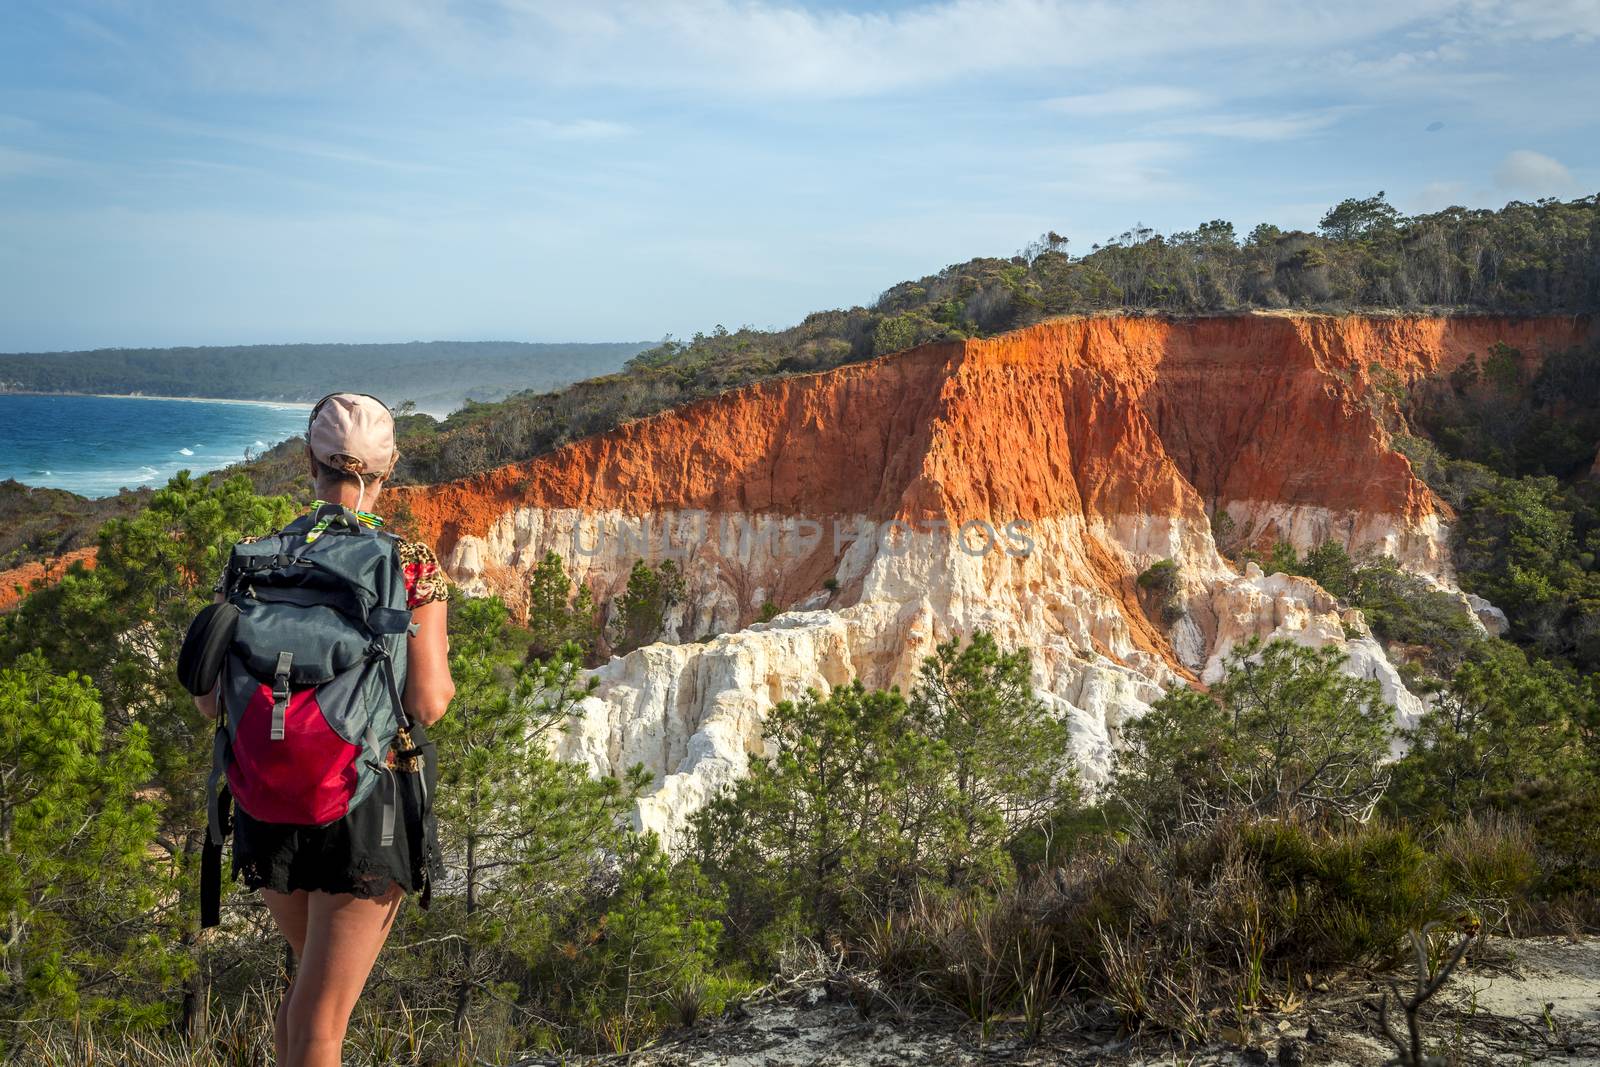 Traveller takes in views of the red and white rock formations in Ben Boyd National Park by lovleah